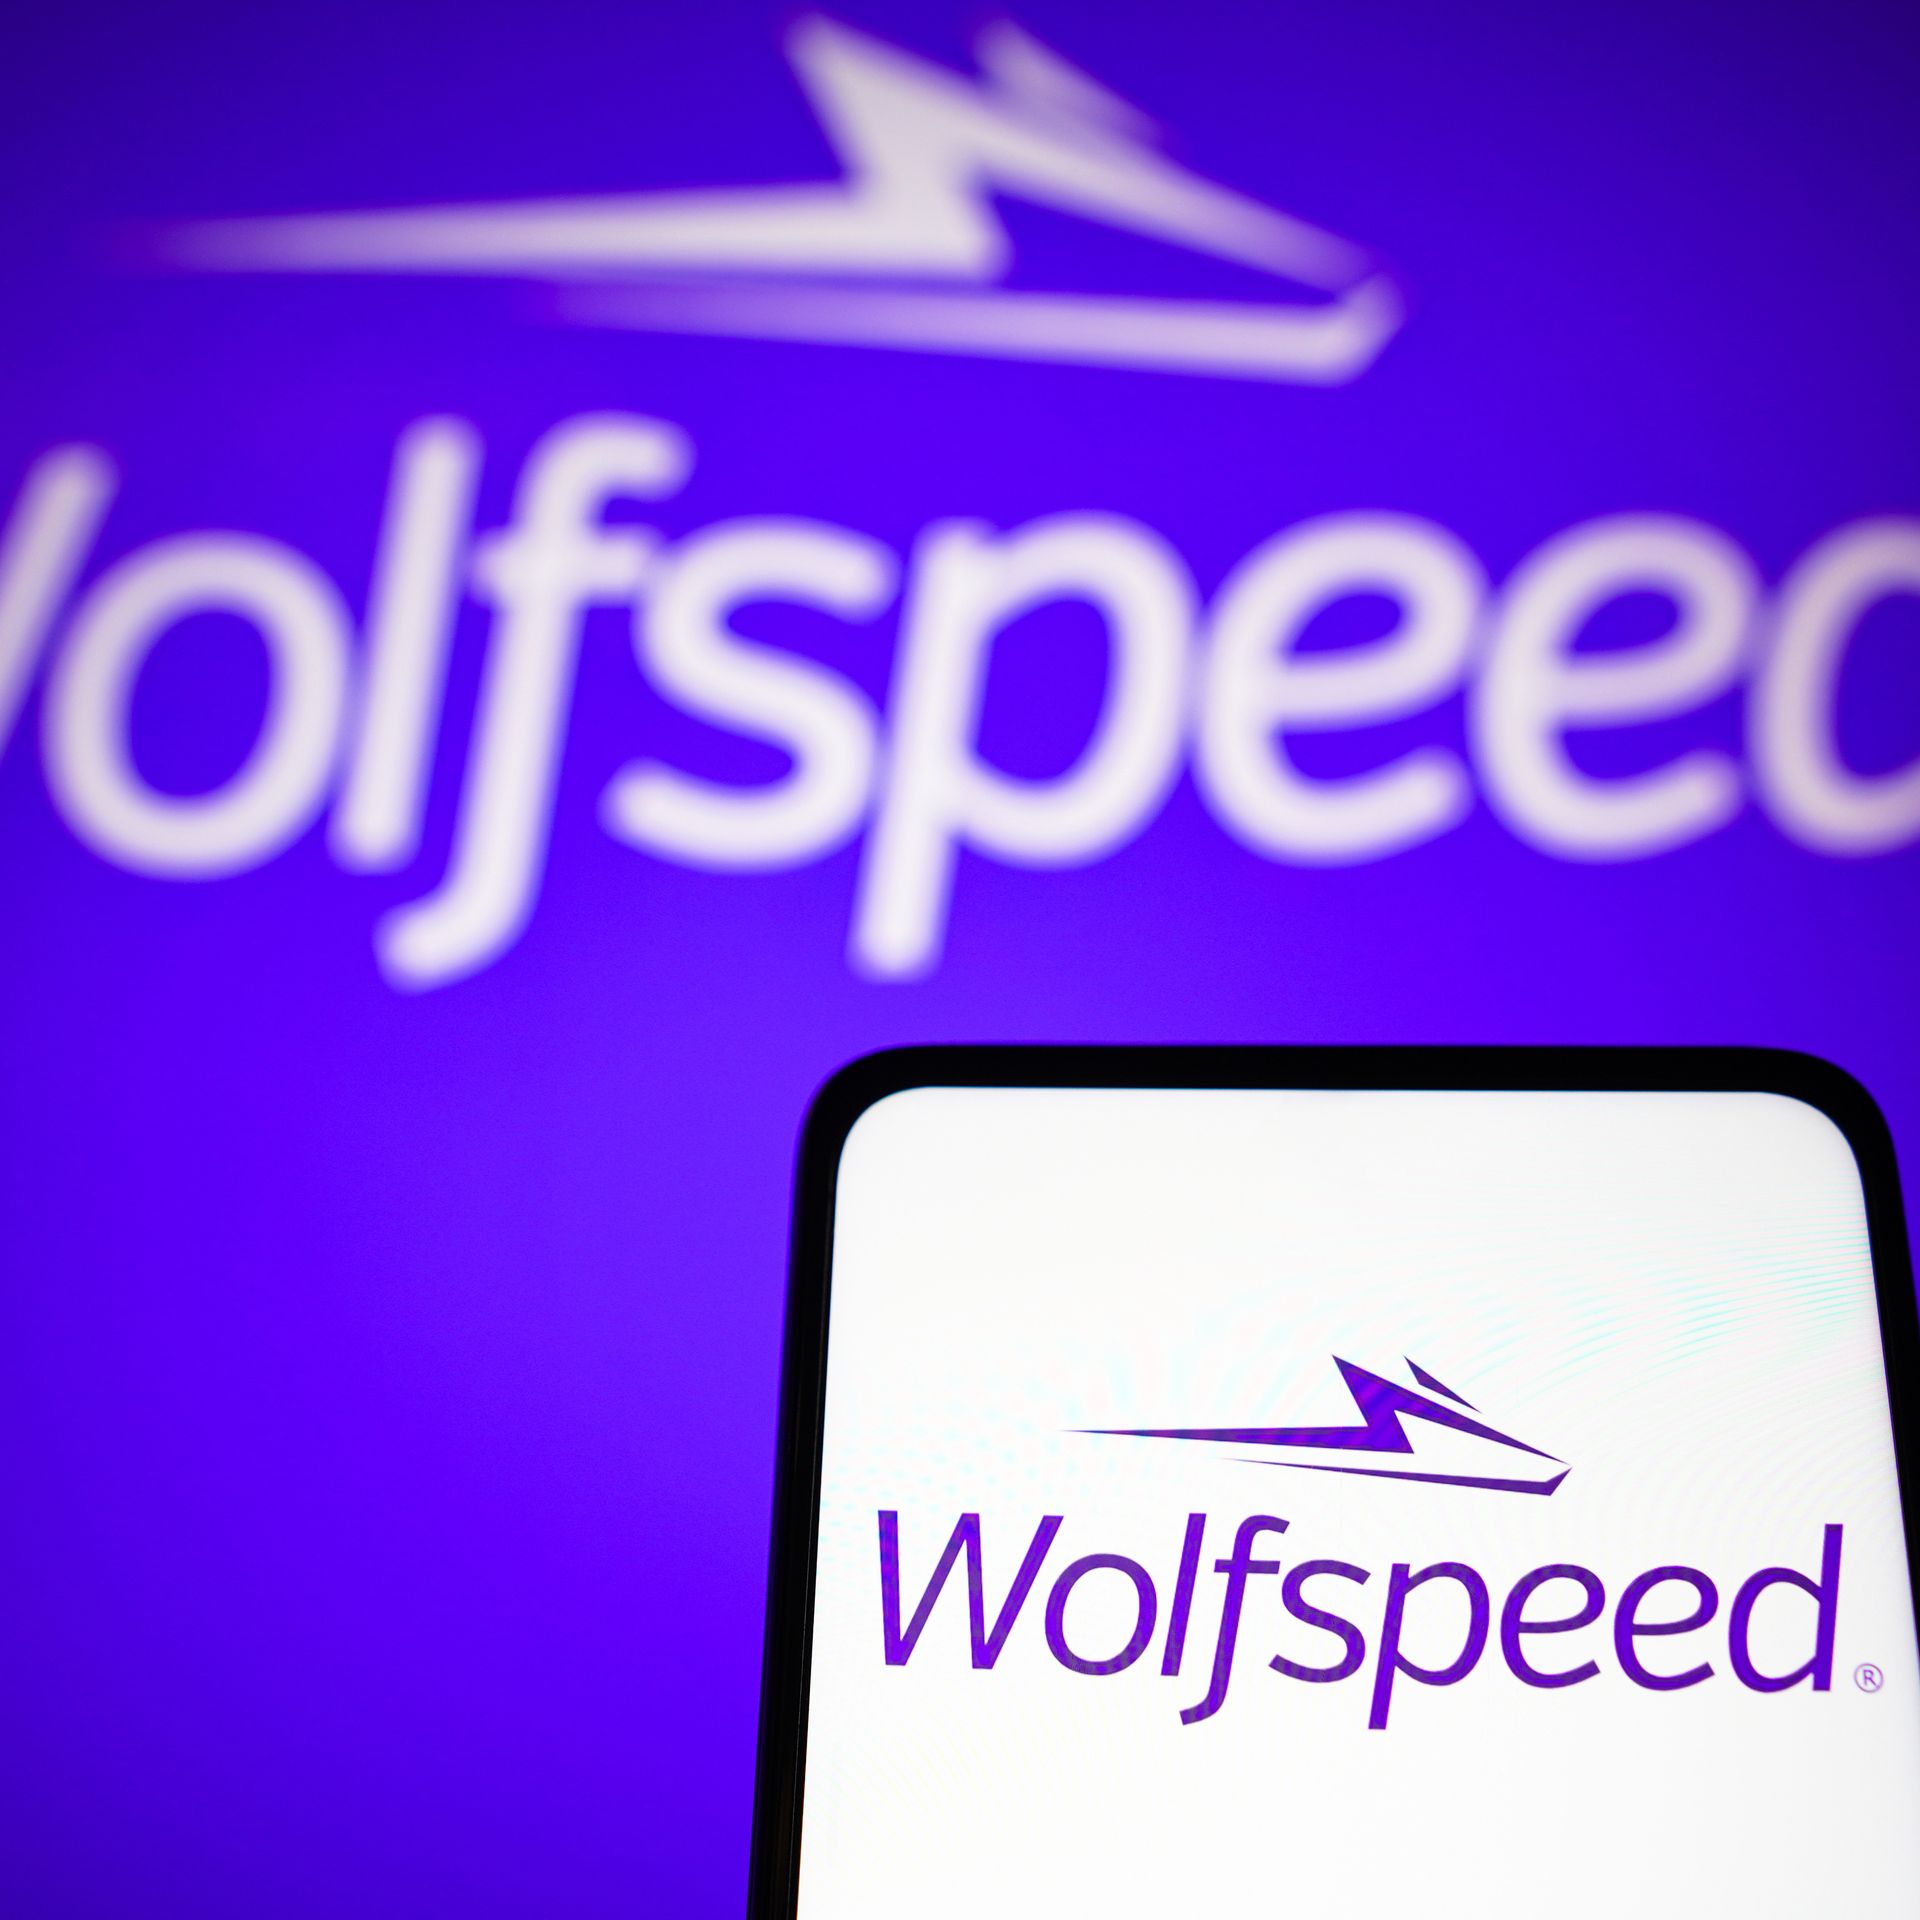 Chip maker Wolfspeed to build new U.S. factory to meet surging EV